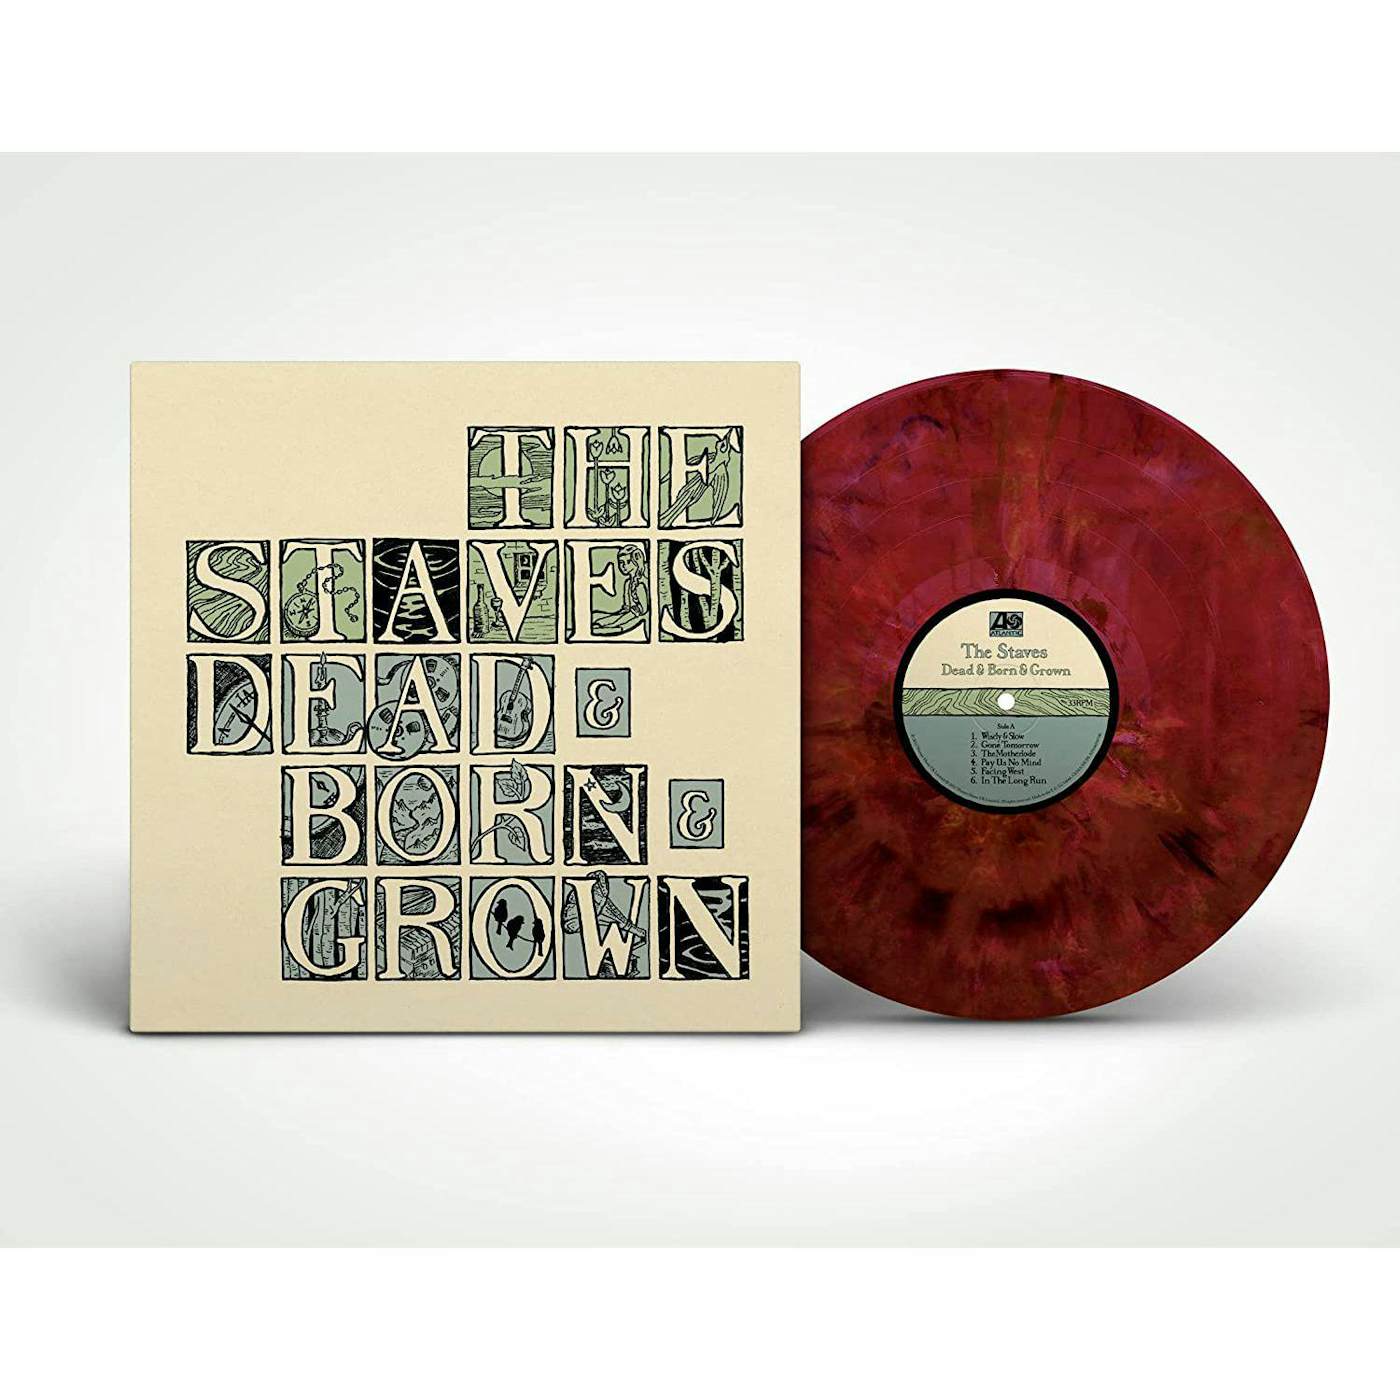 The Staves Dead & Born & Grown: 10th Anniversary Vinyl Record